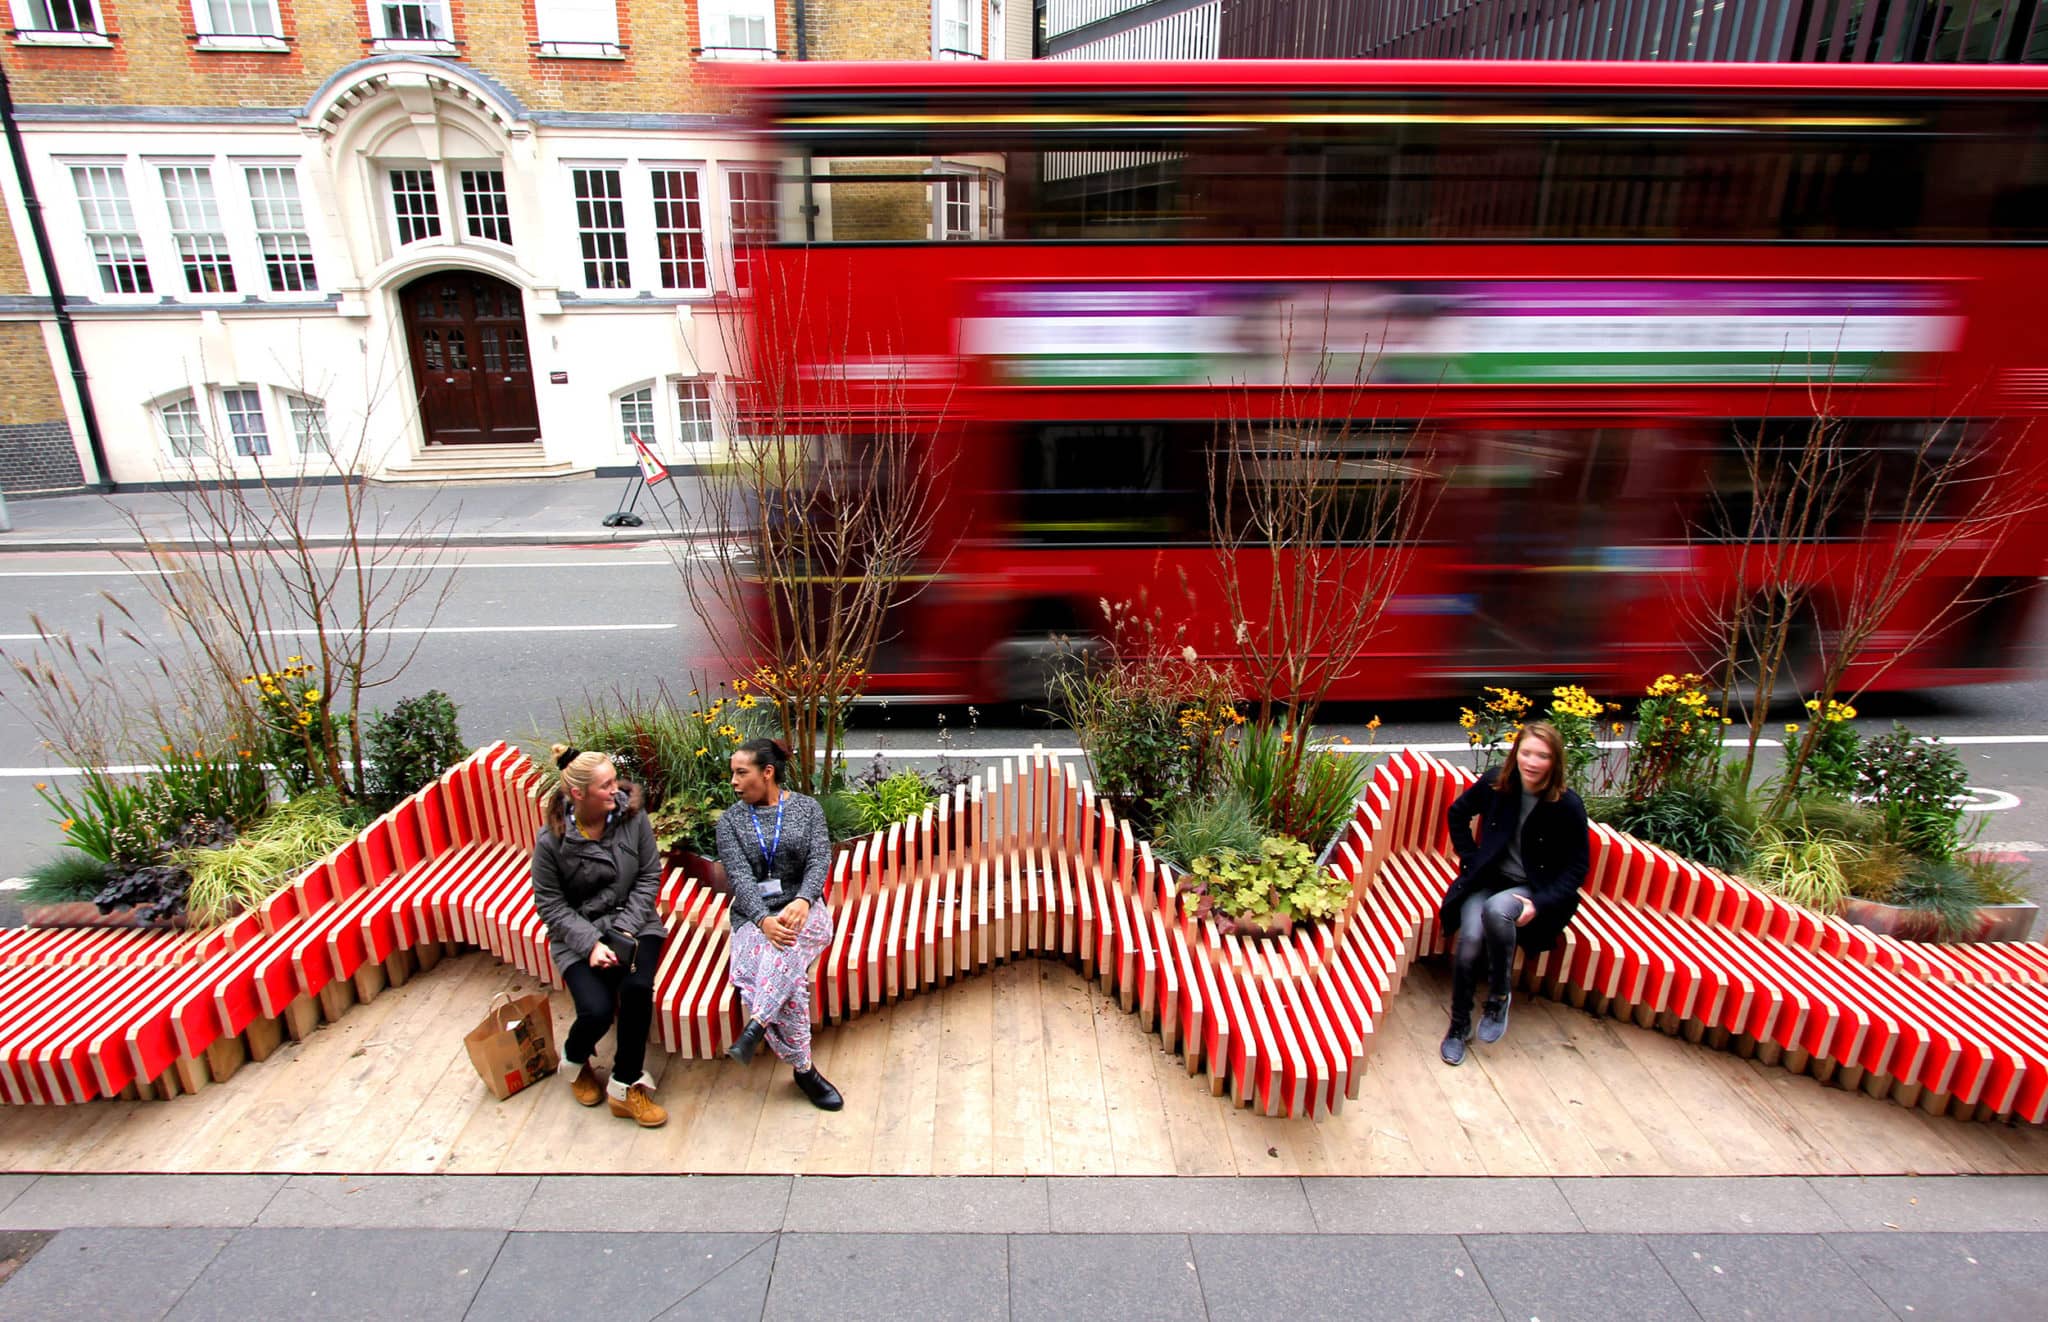 Exterior photography of a parametric zigzag continued public bench with people sitting on it; day mode bird-eye view.